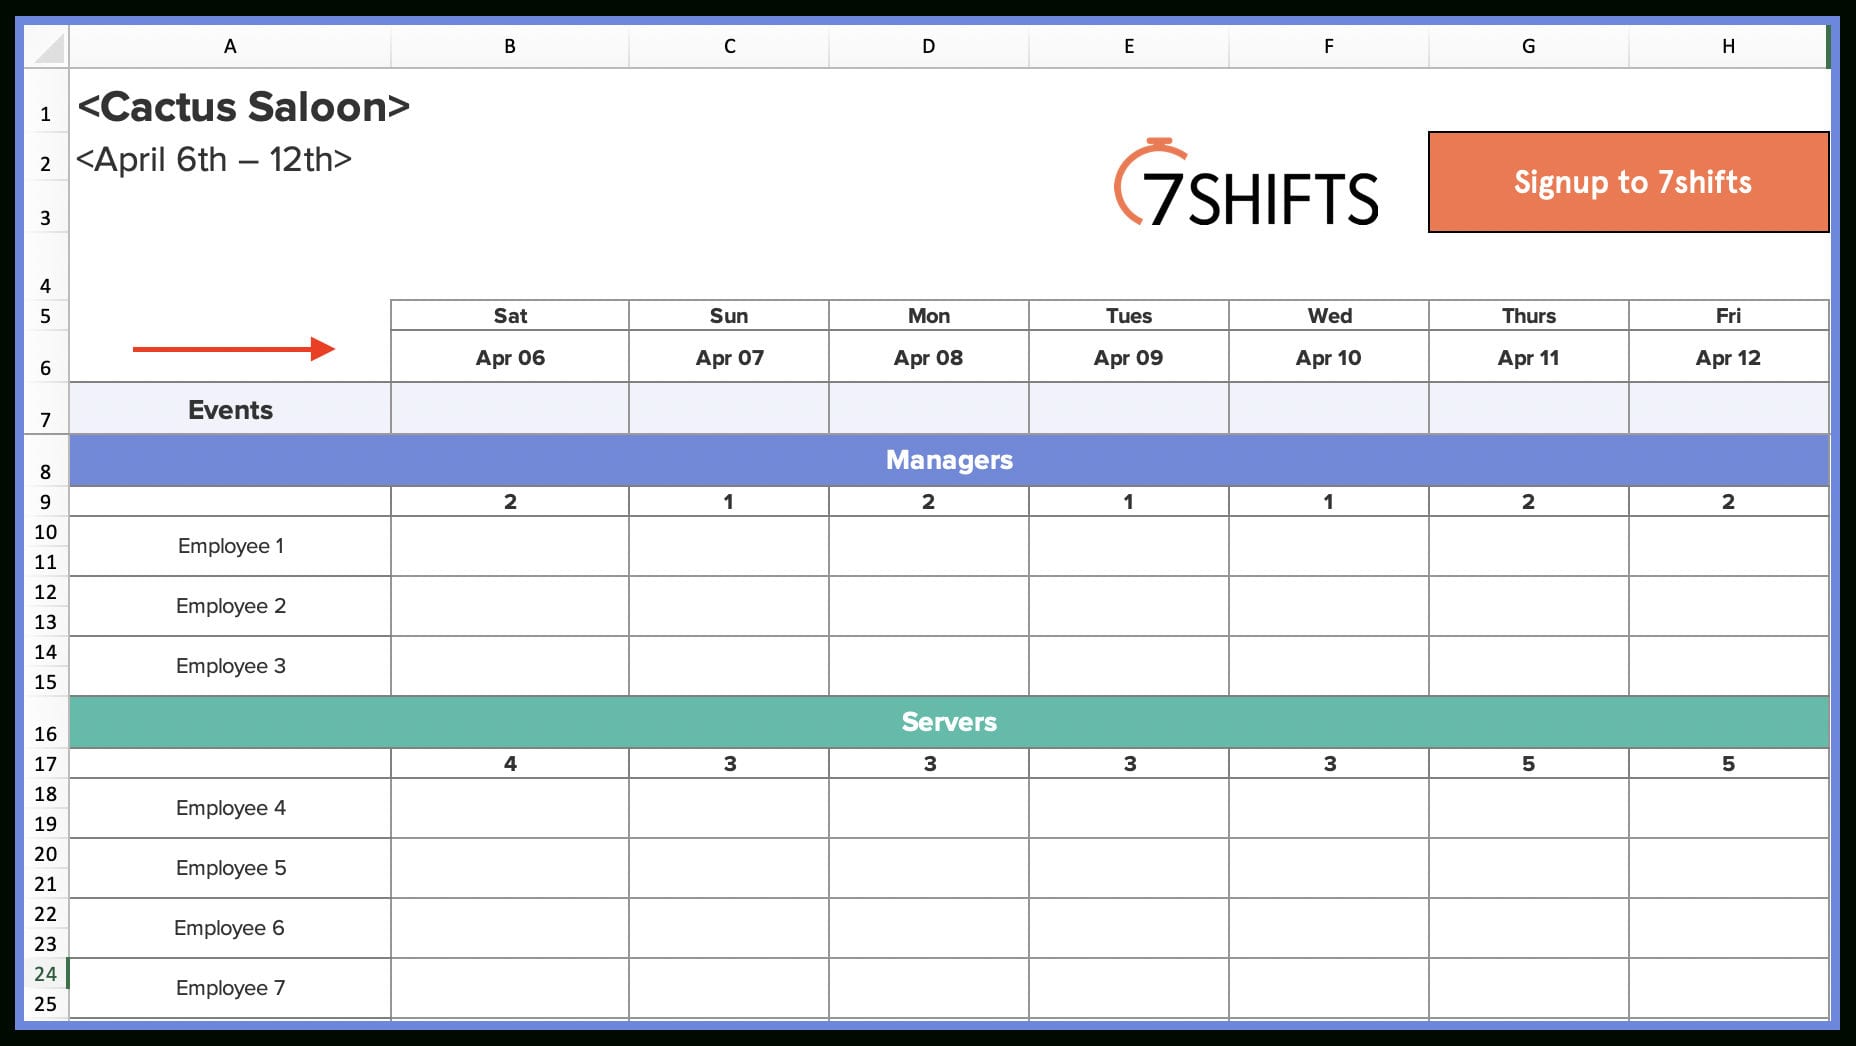 How To Make A Restaurant Work Schedule With Free Excel And Employee Schedule Worksheet